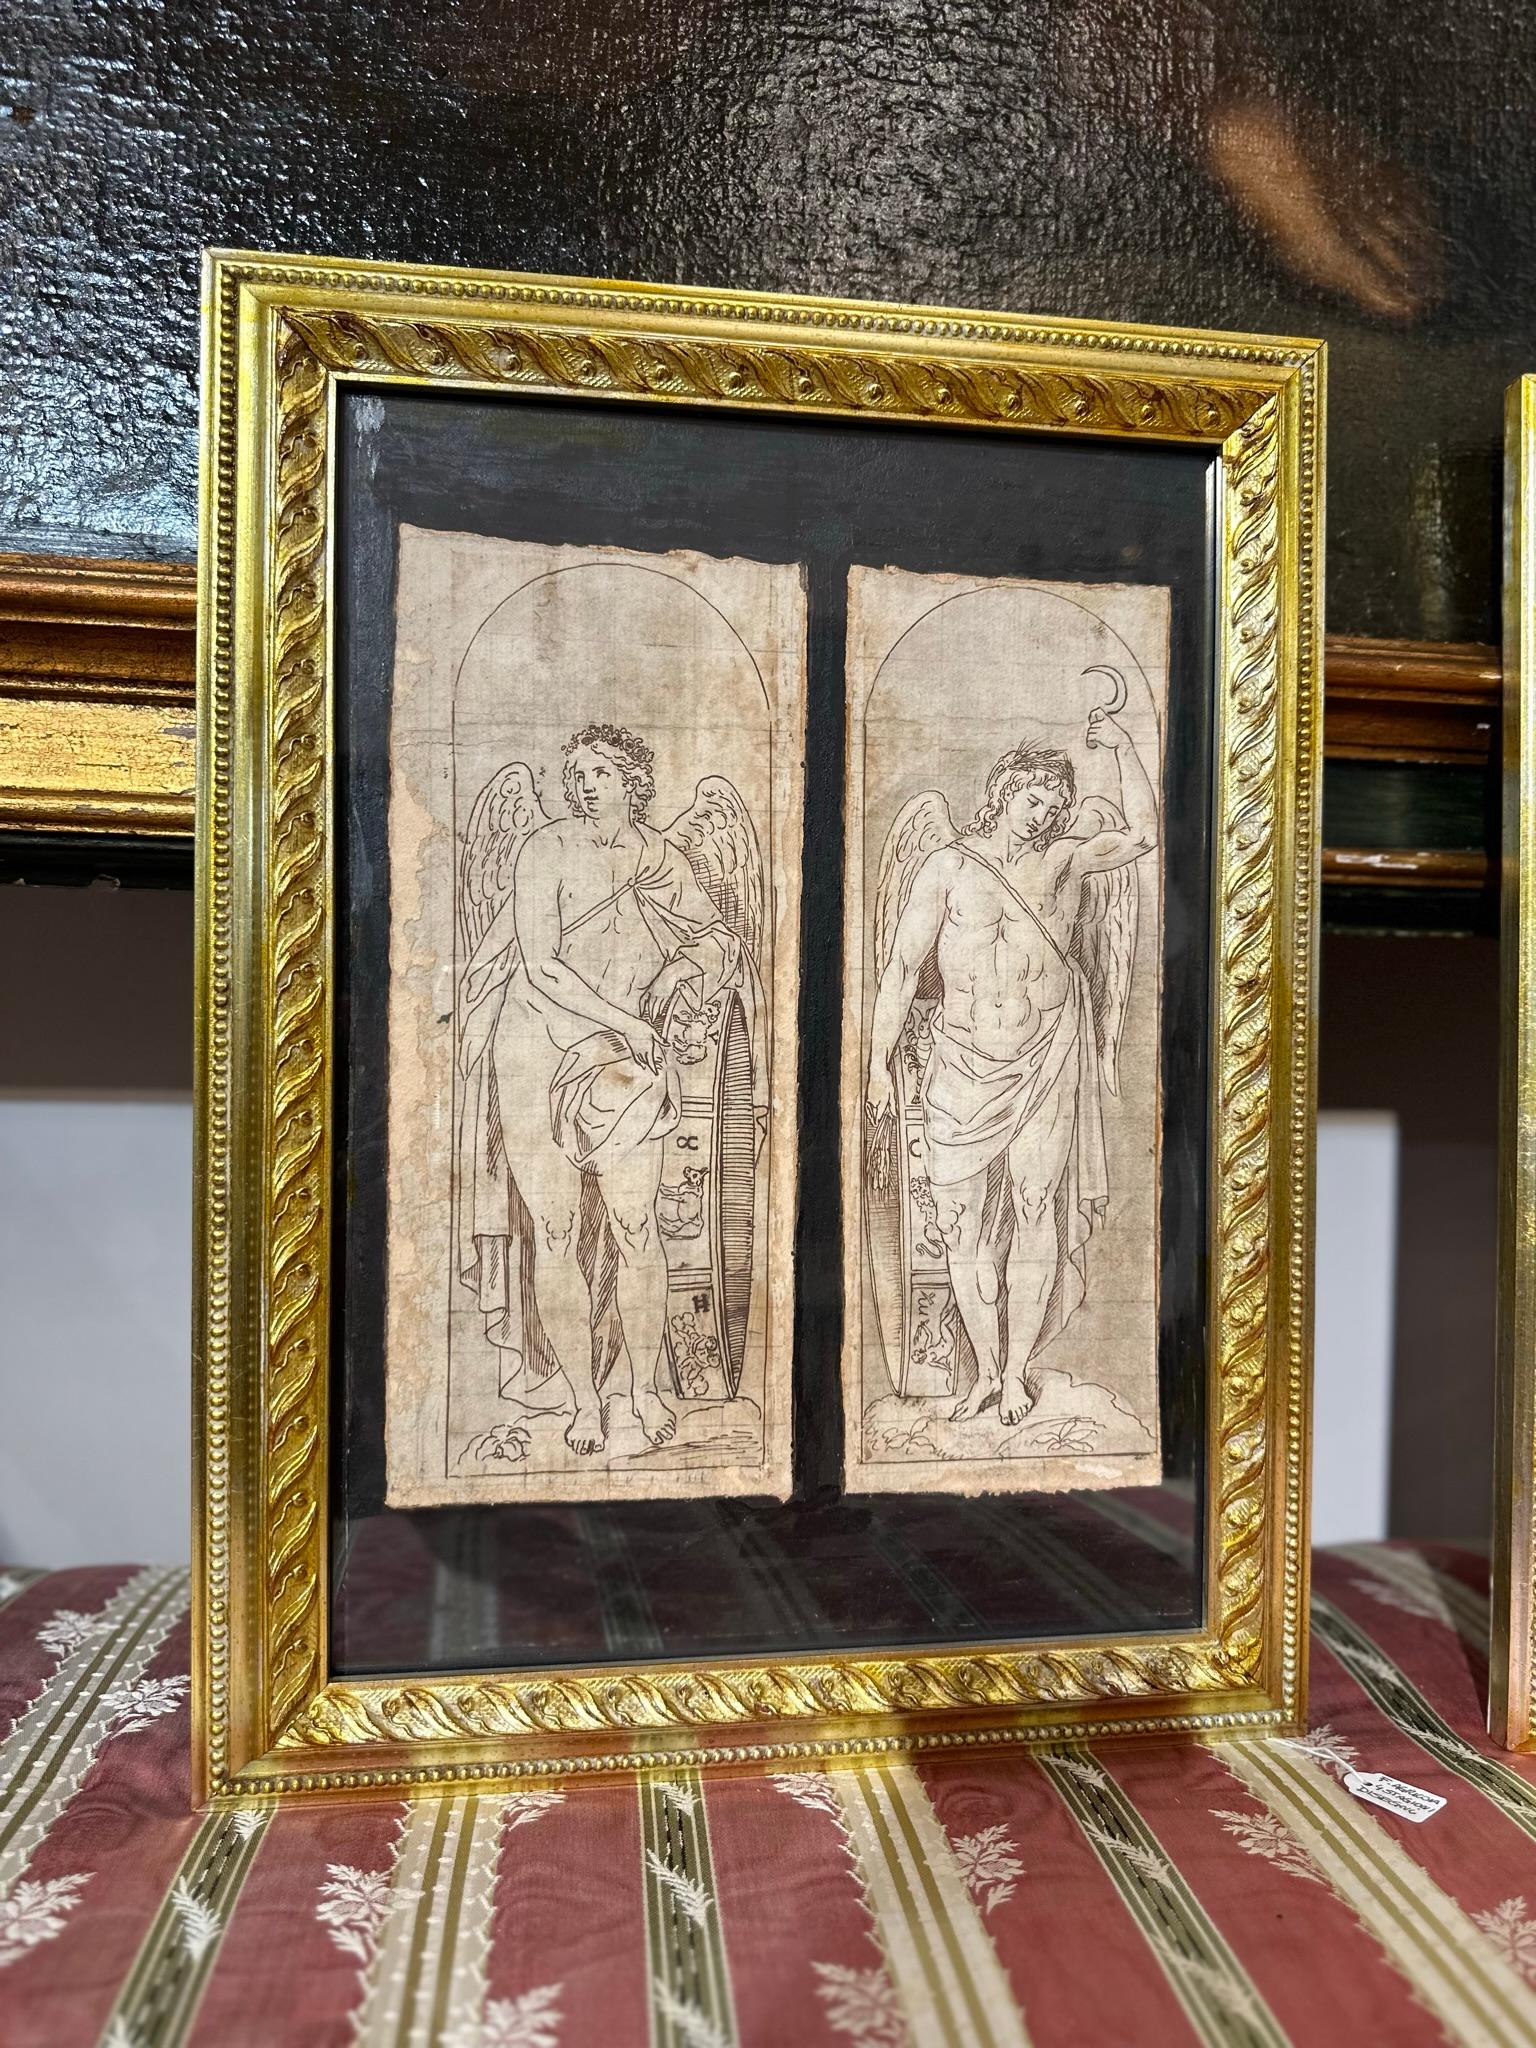 Refined neoclassical style drawings depicting the allegory of the four seasons. The drawings must have been sinopias for paintings or frescoes. The drawings were made on paper using ink, white lead and watercolour. The manufacture is Neapolitan,